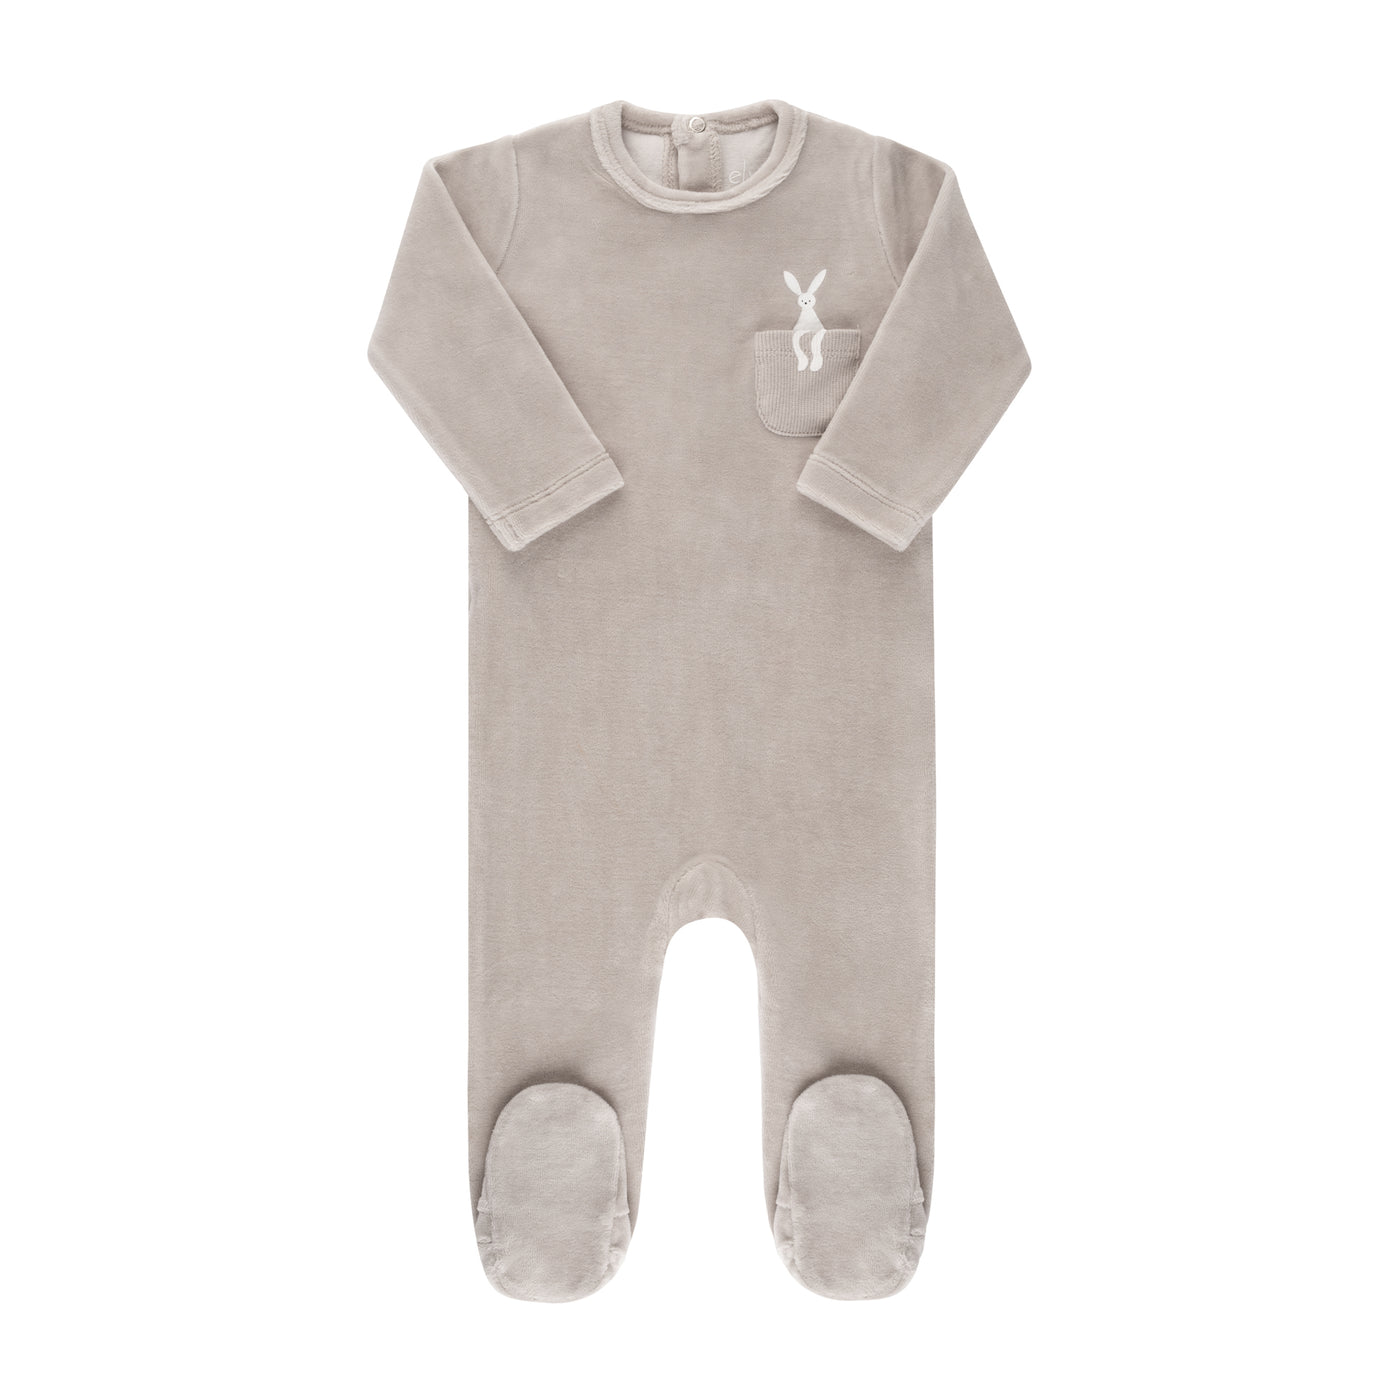 Ely's & Co. Bunny on Pocket Taupe Velour Footie